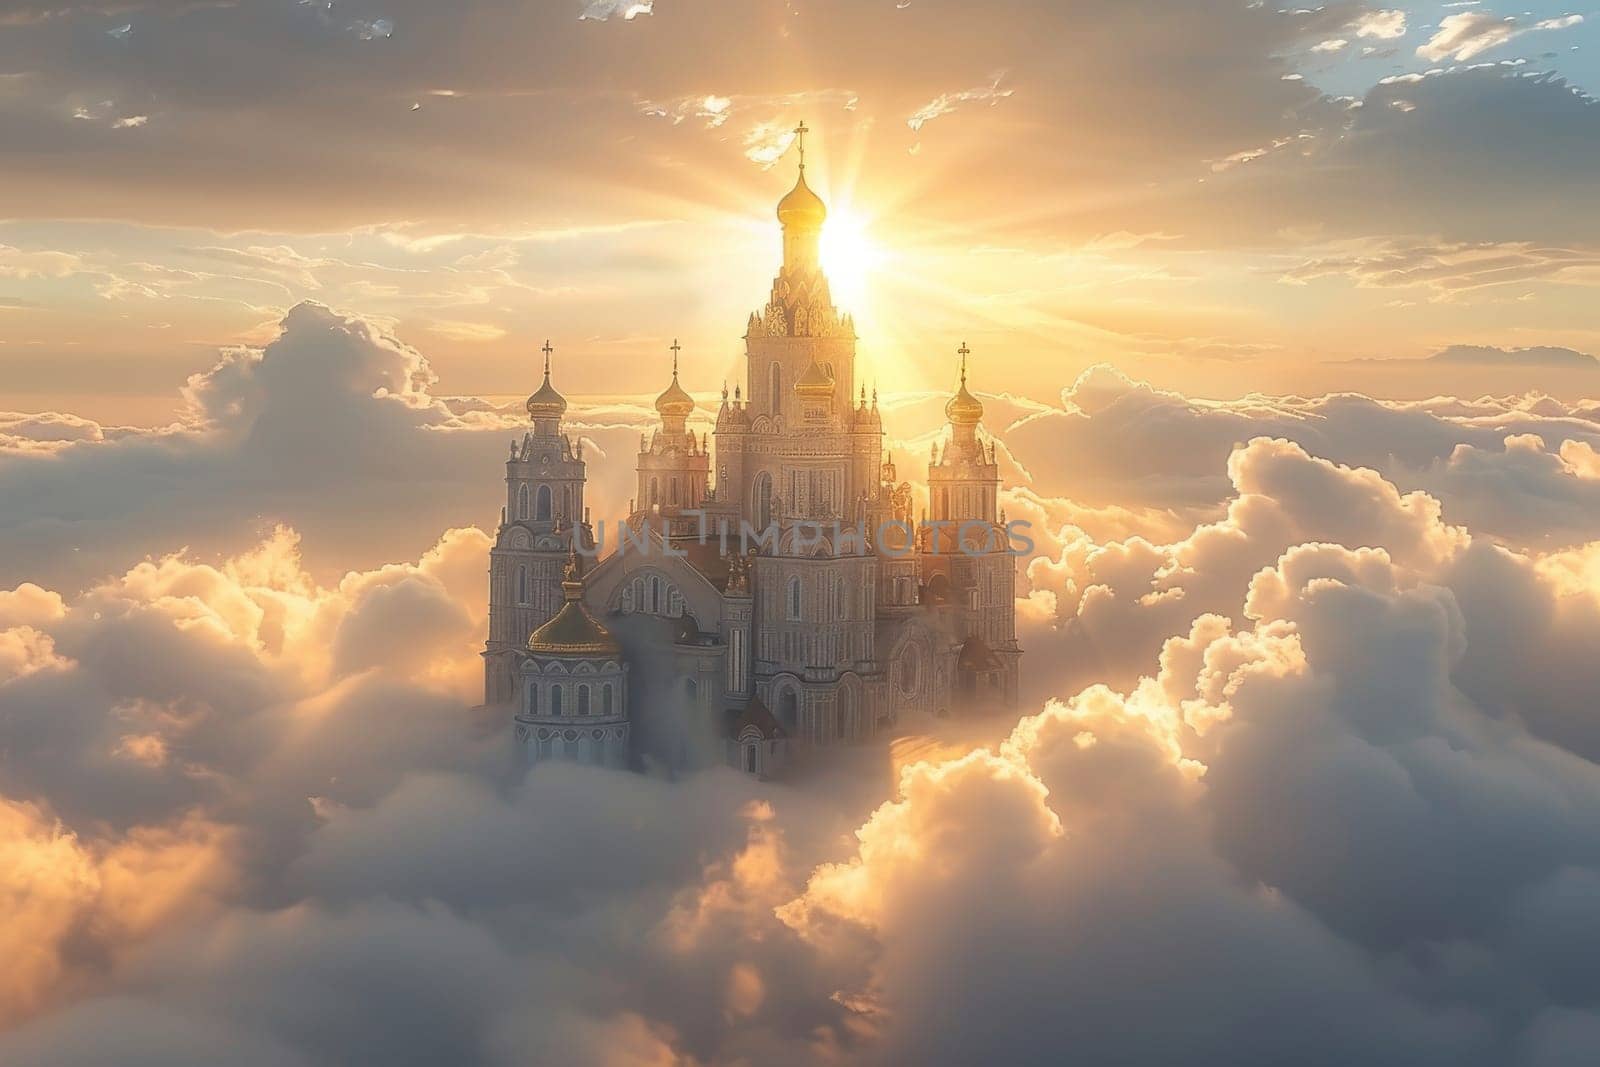 A castle is floating in the sky with a sun shining on it by itchaznong